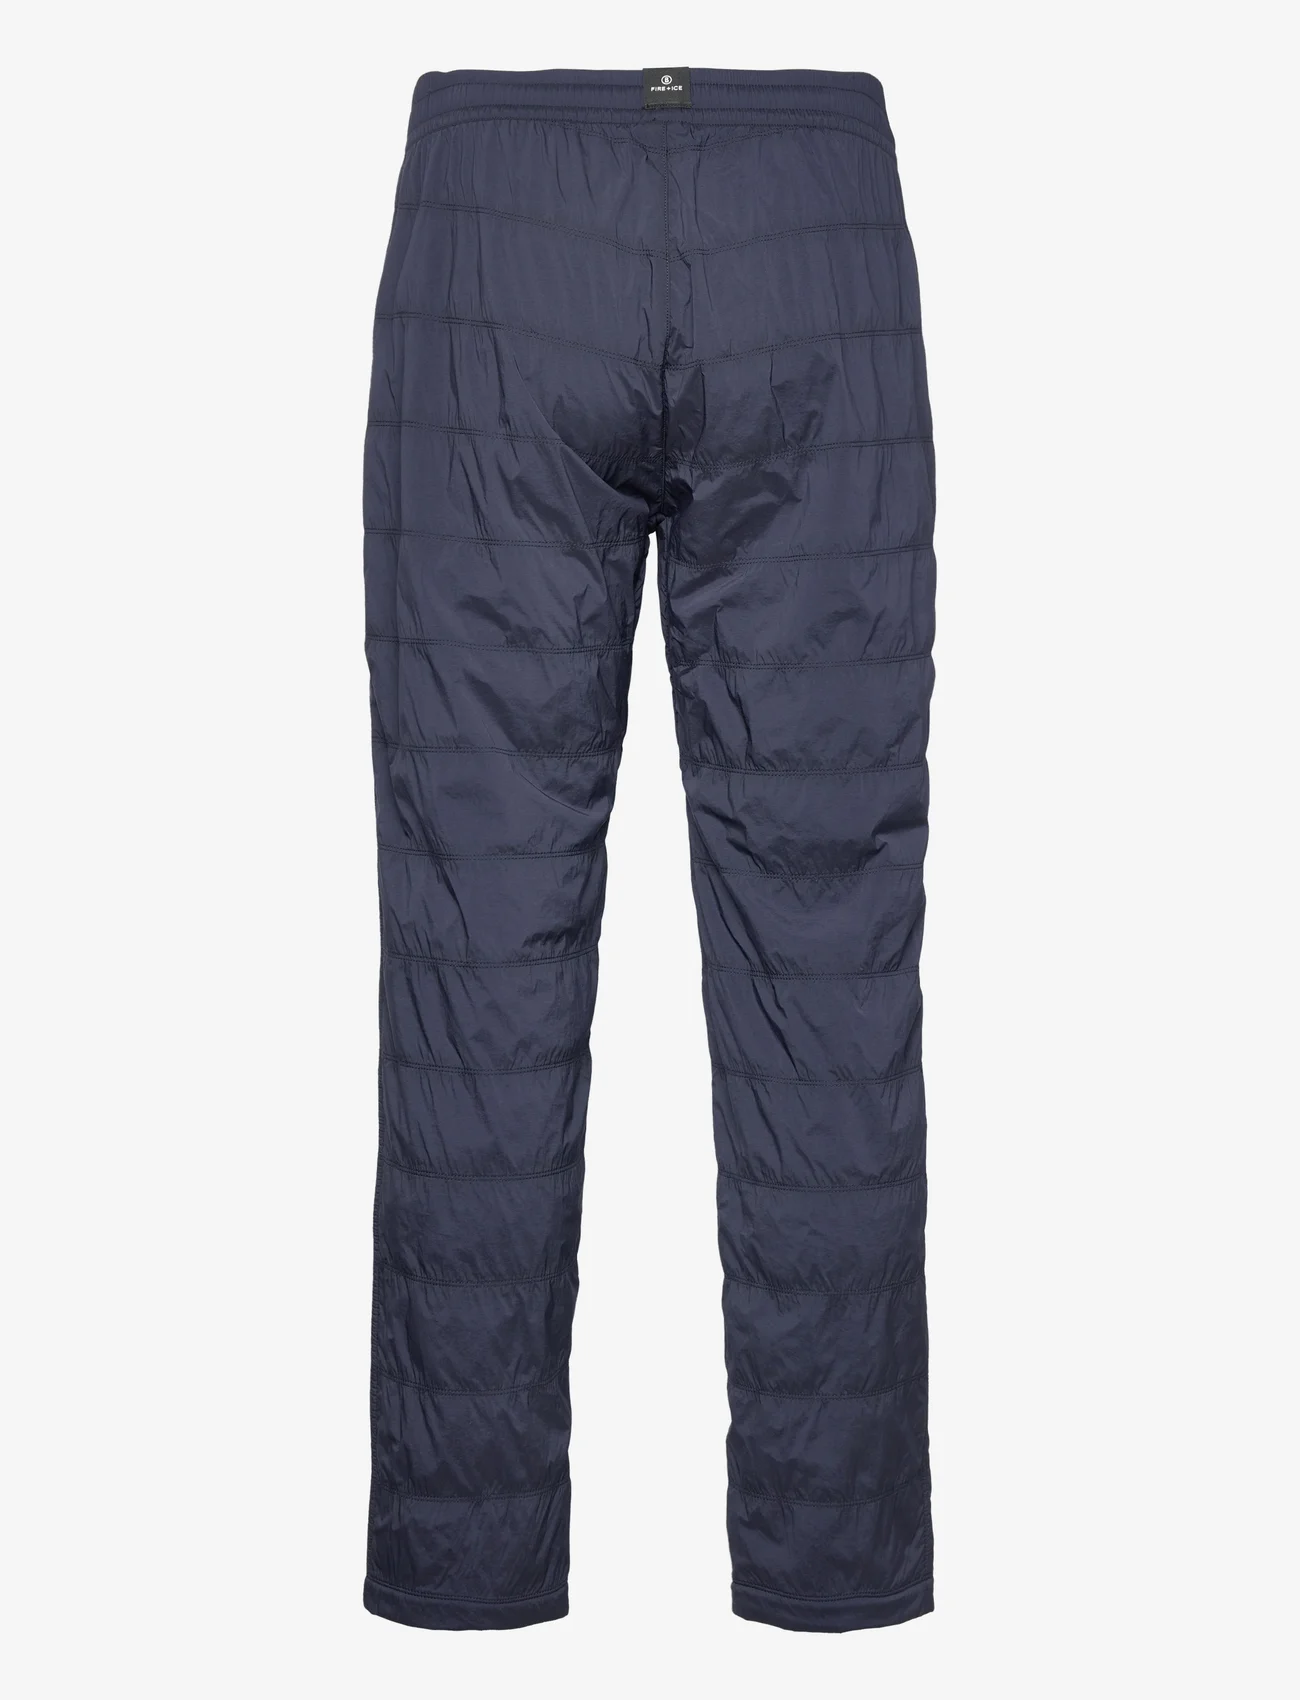 FIRE+ICE - CERES - outdoor pants - deepest navy - 1